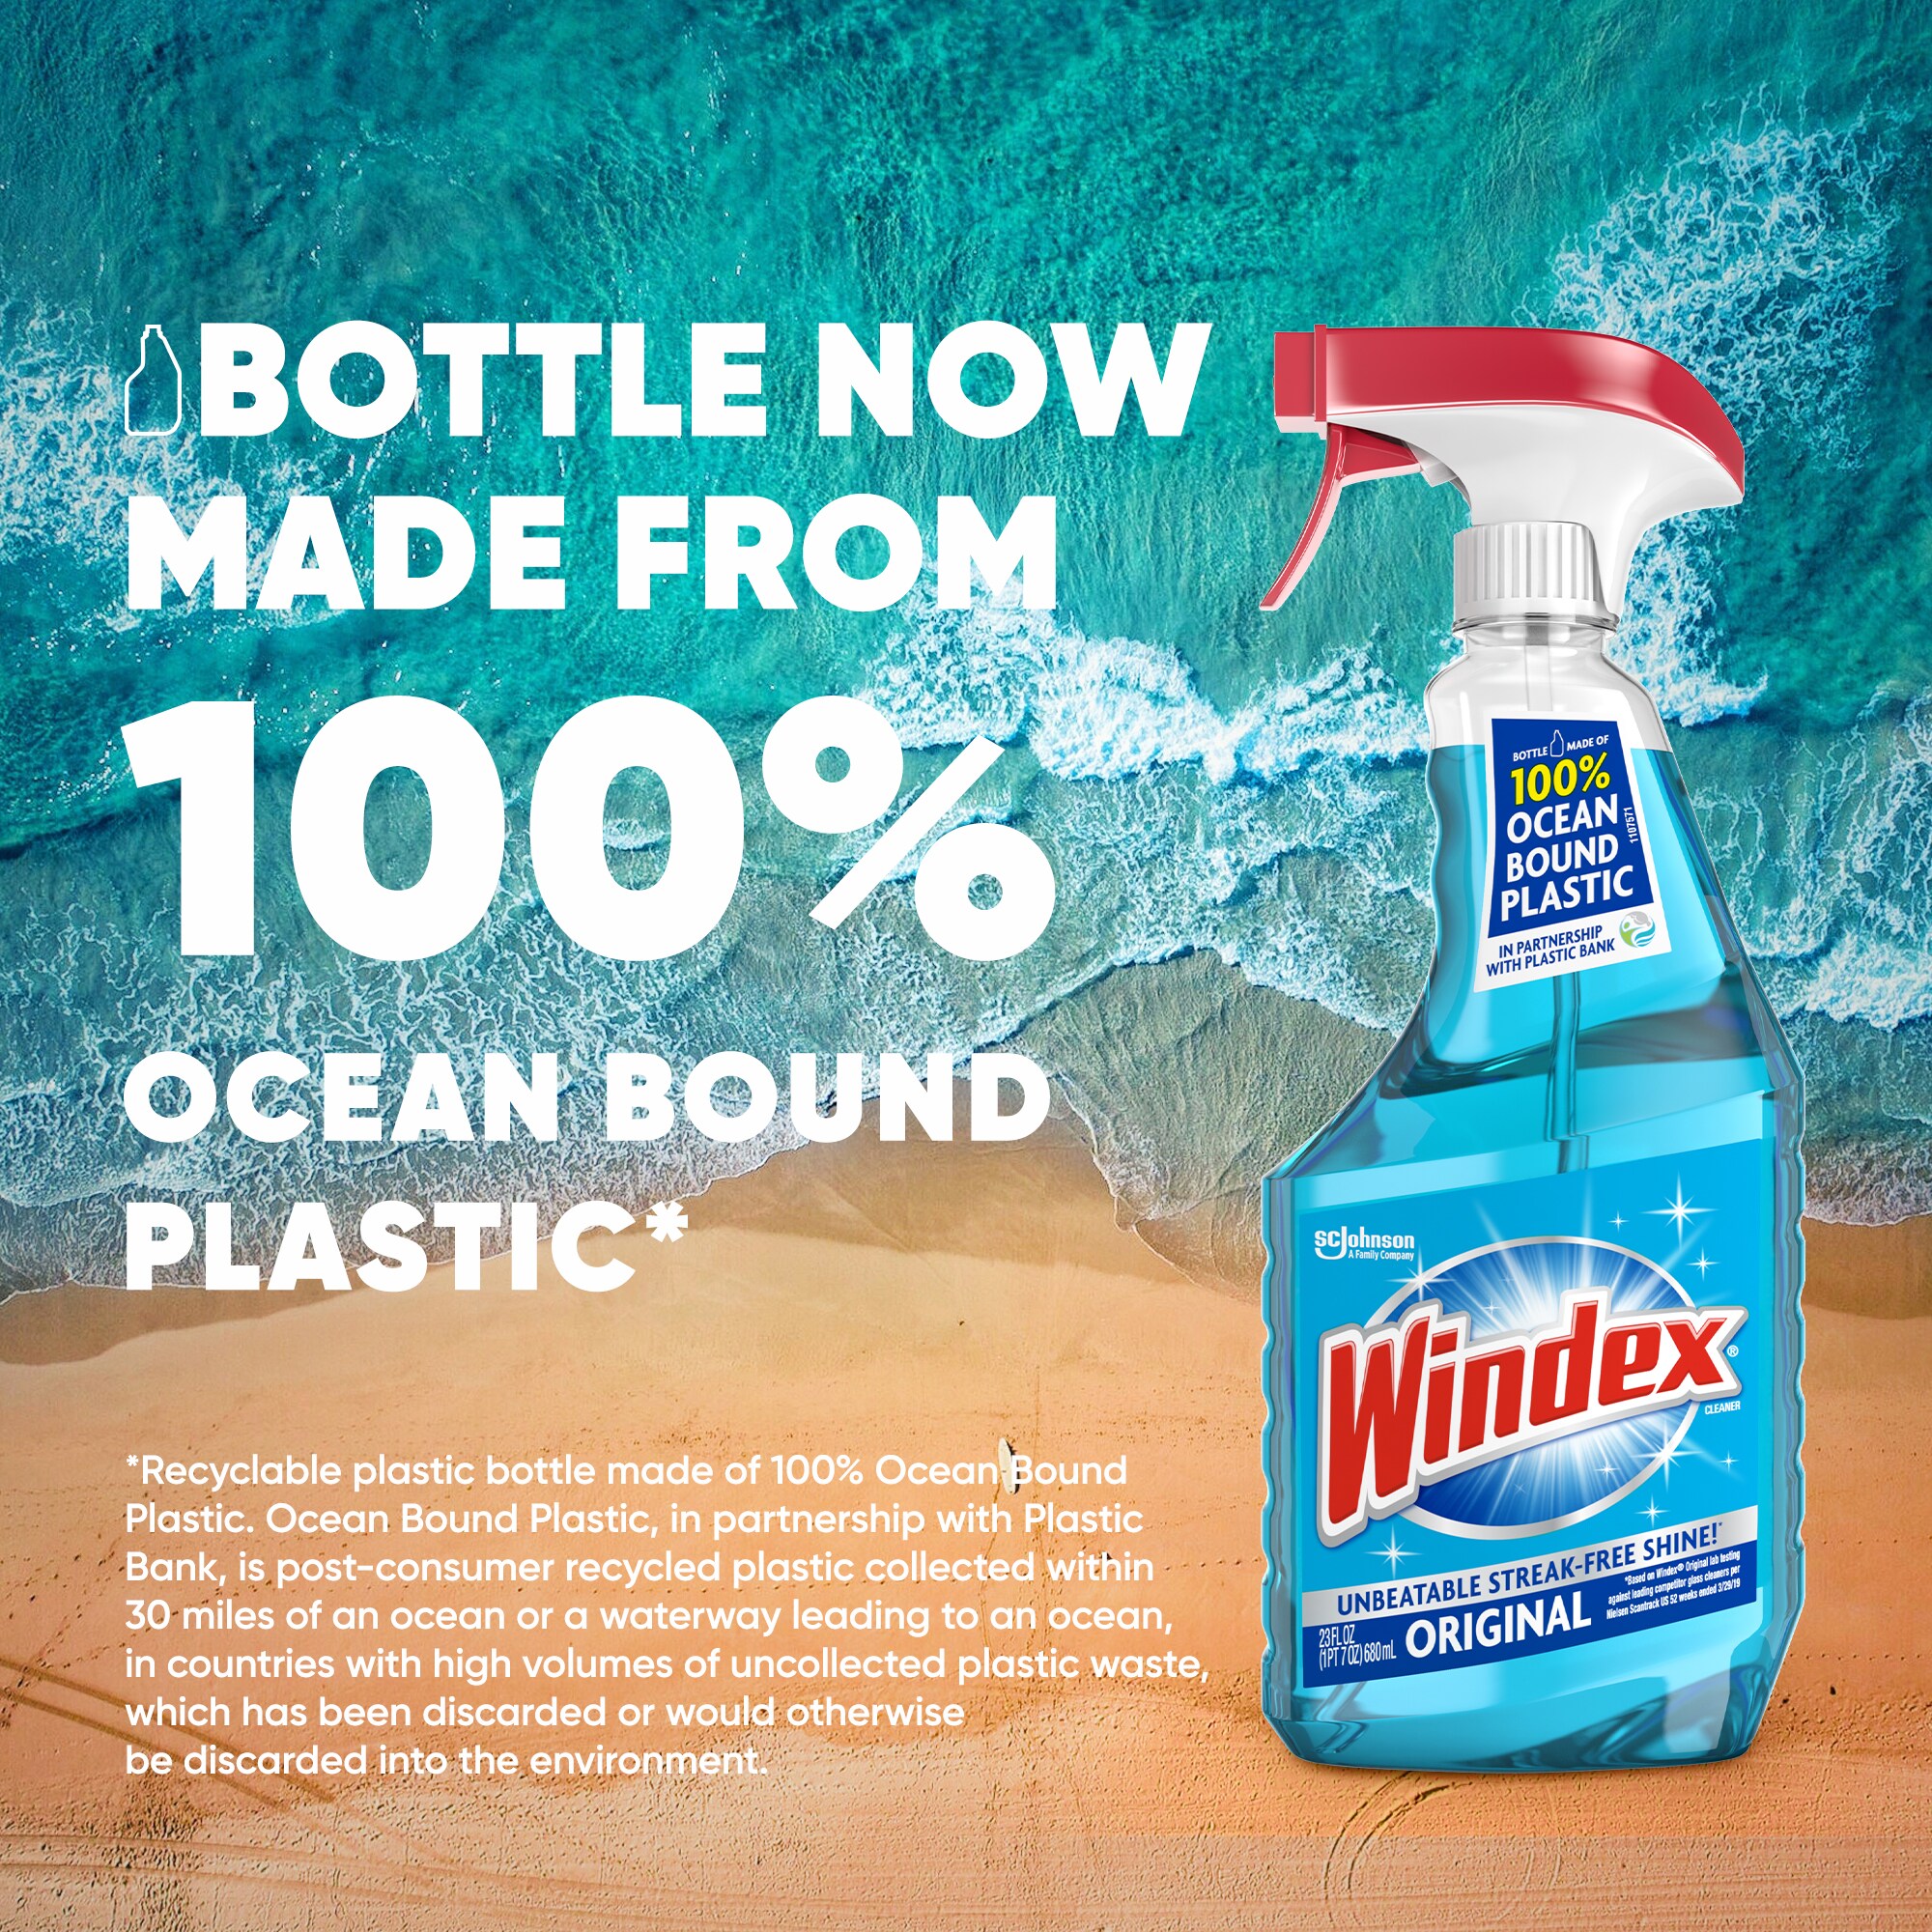 Windex Original Glass Cleaner Gallon - Body One Products